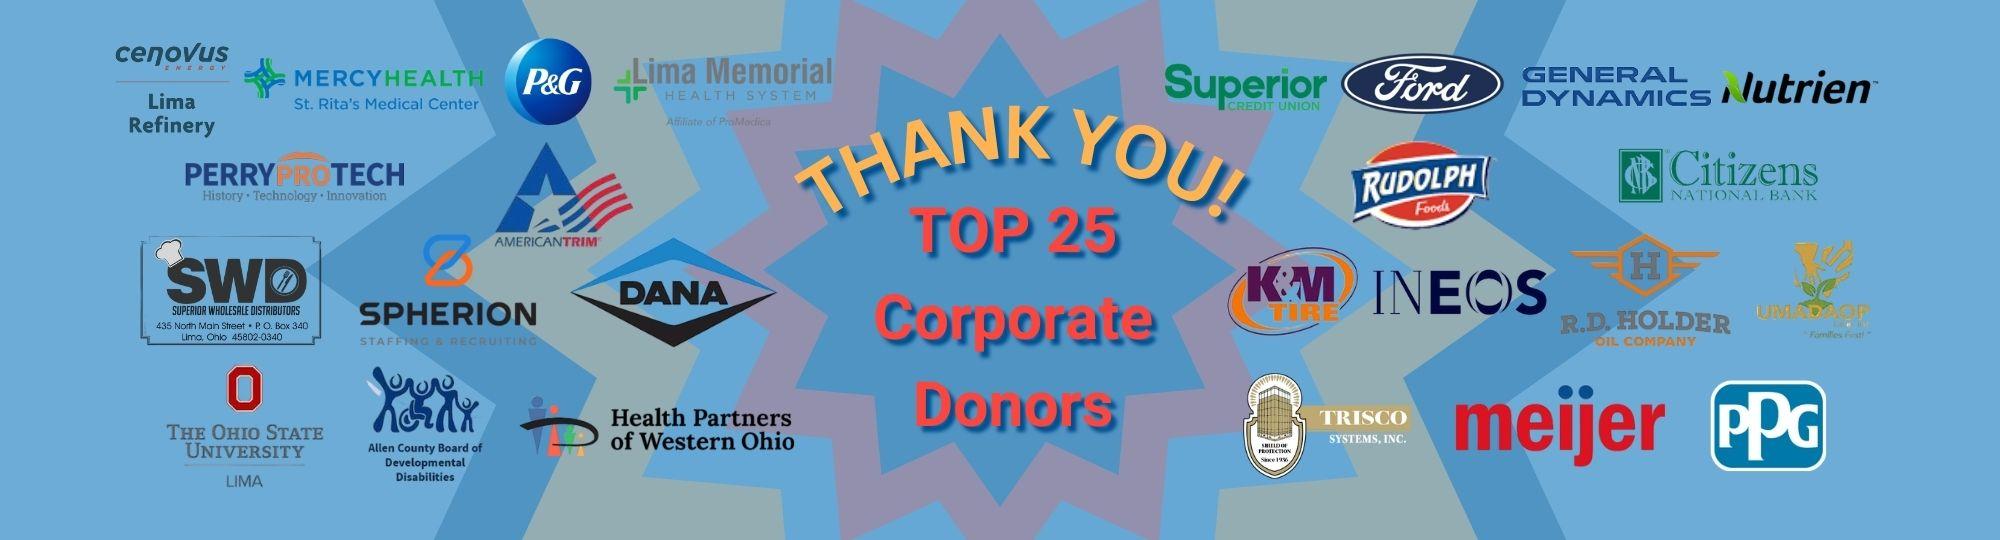 Thank You Top 25 Corporate Donors!